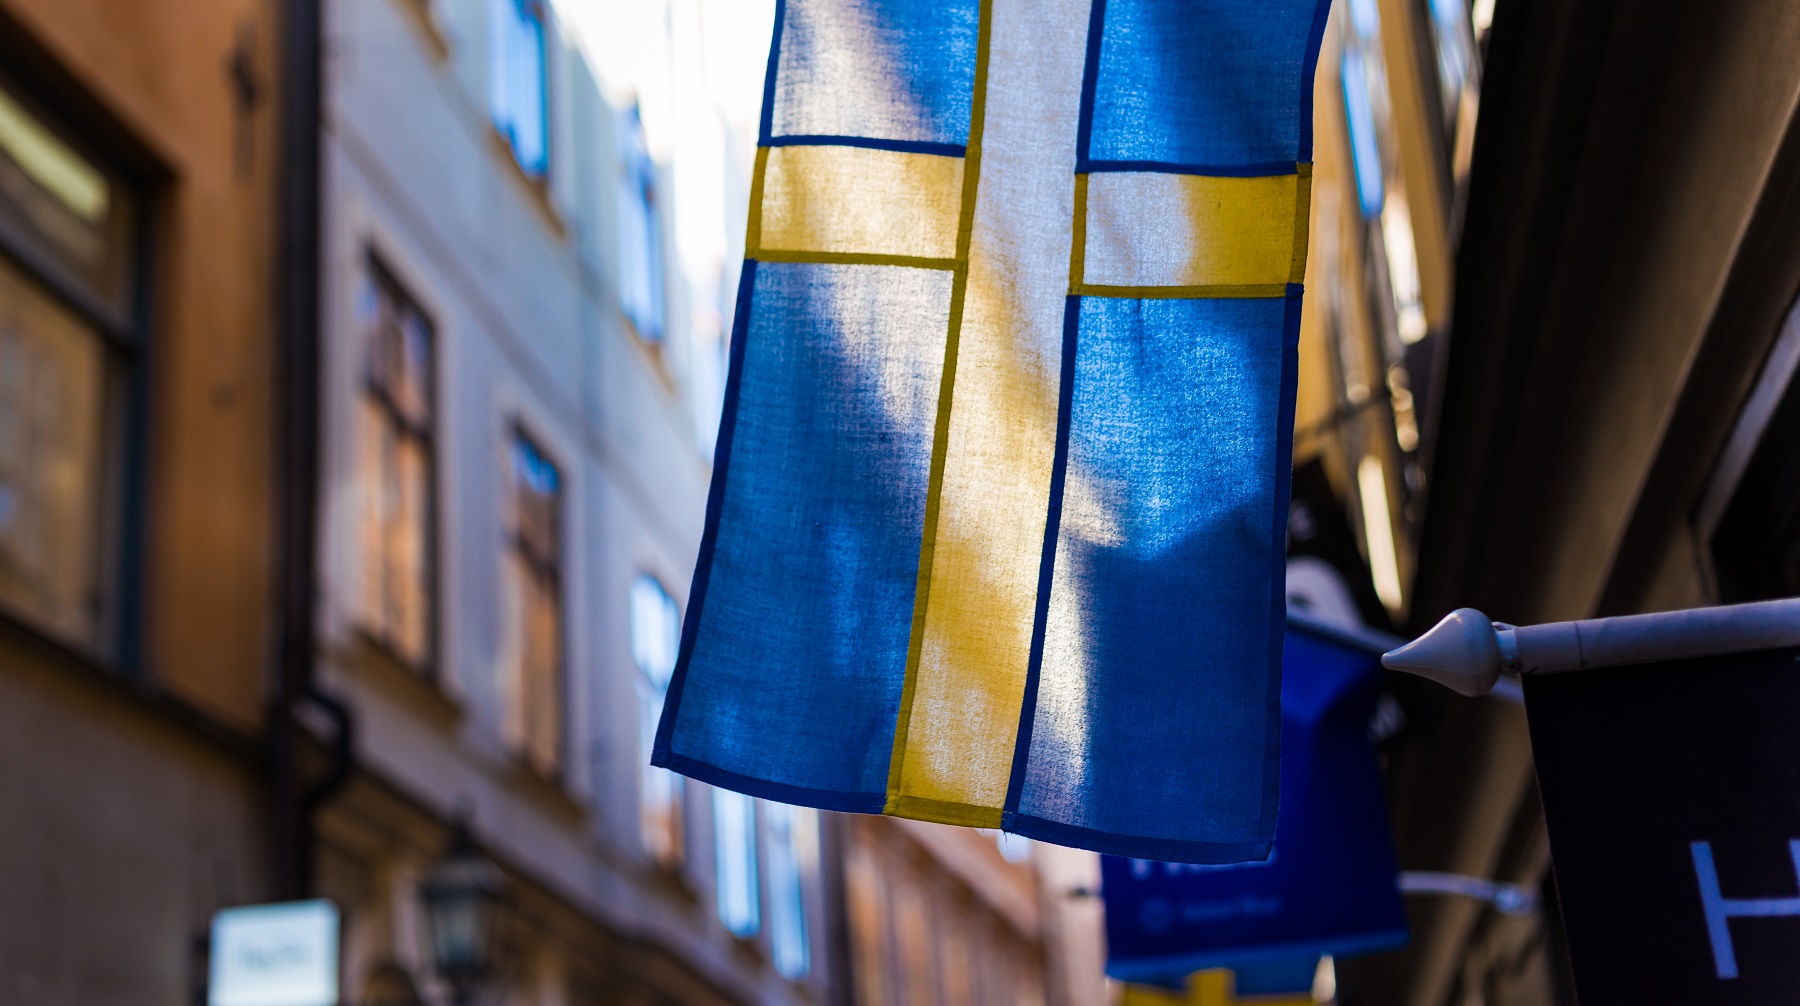 4 facts about the Swedish language